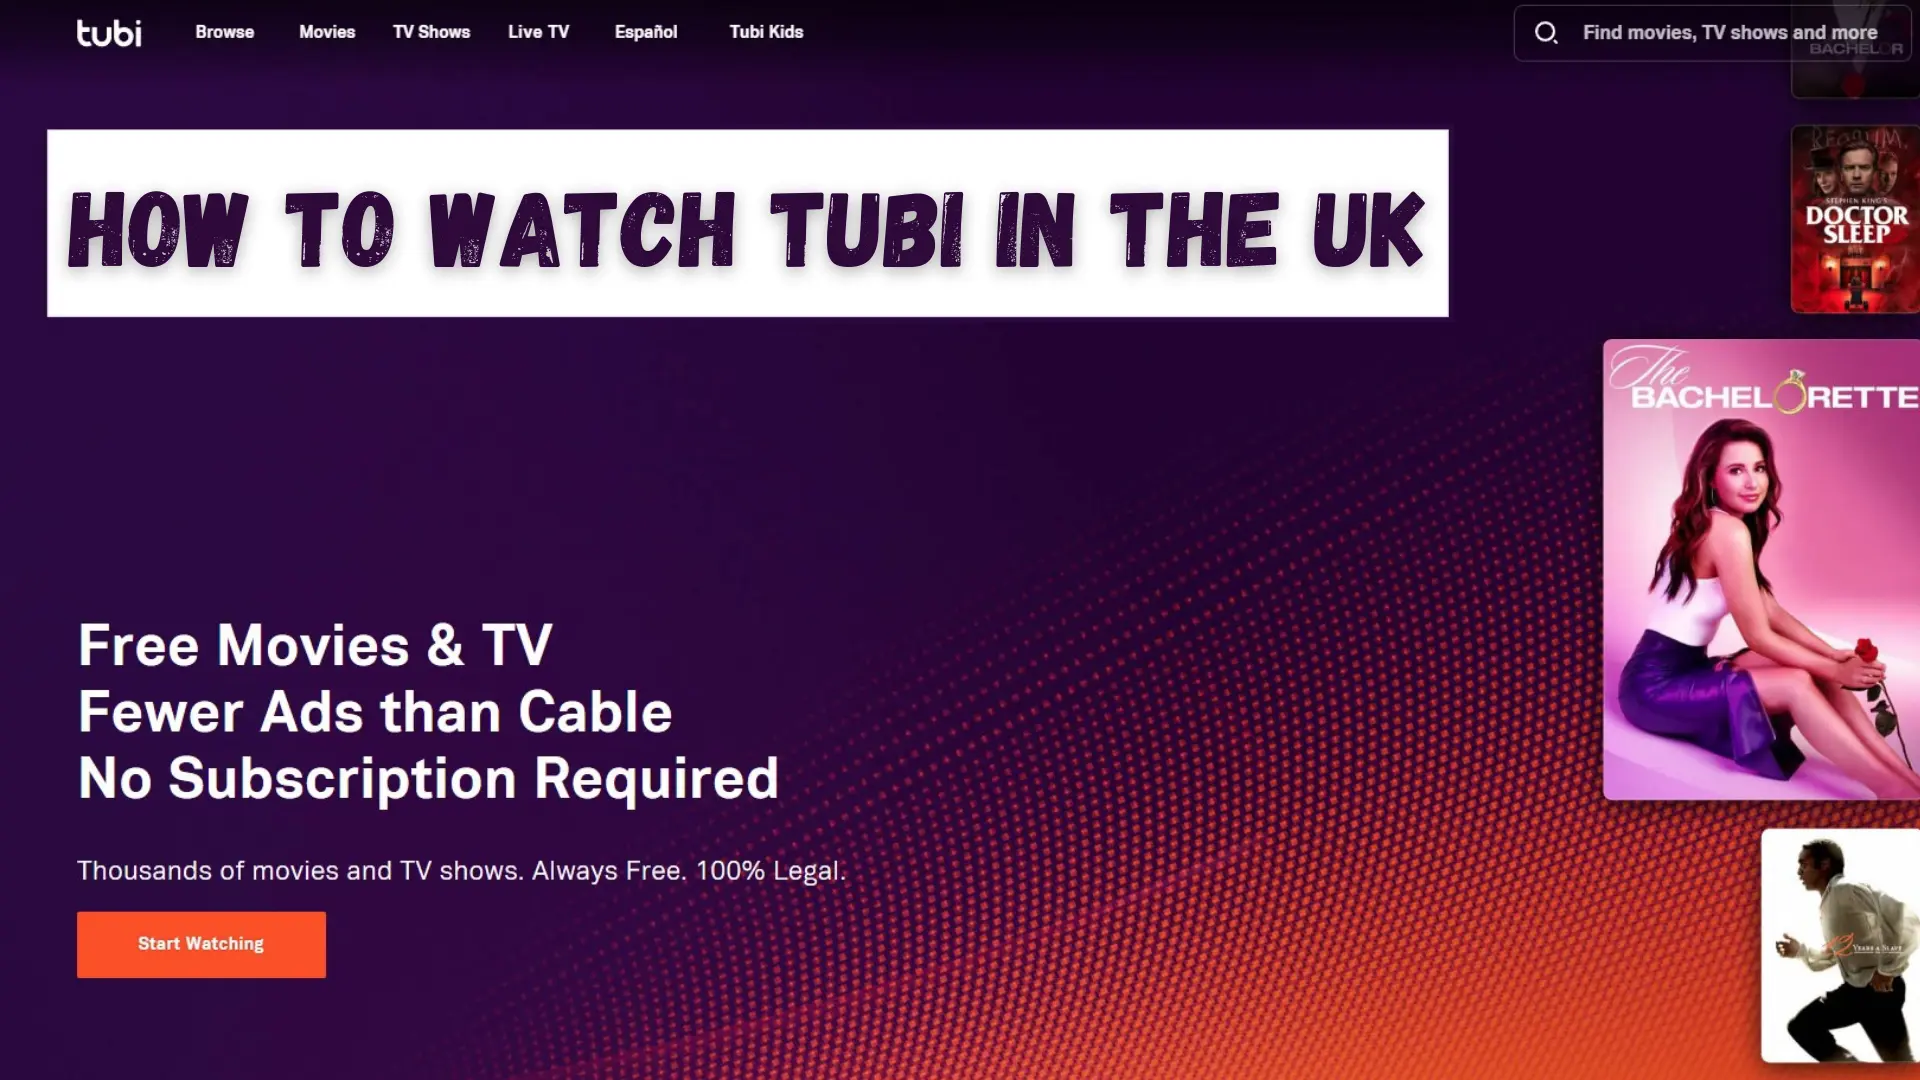 Watch Tubi in the UK